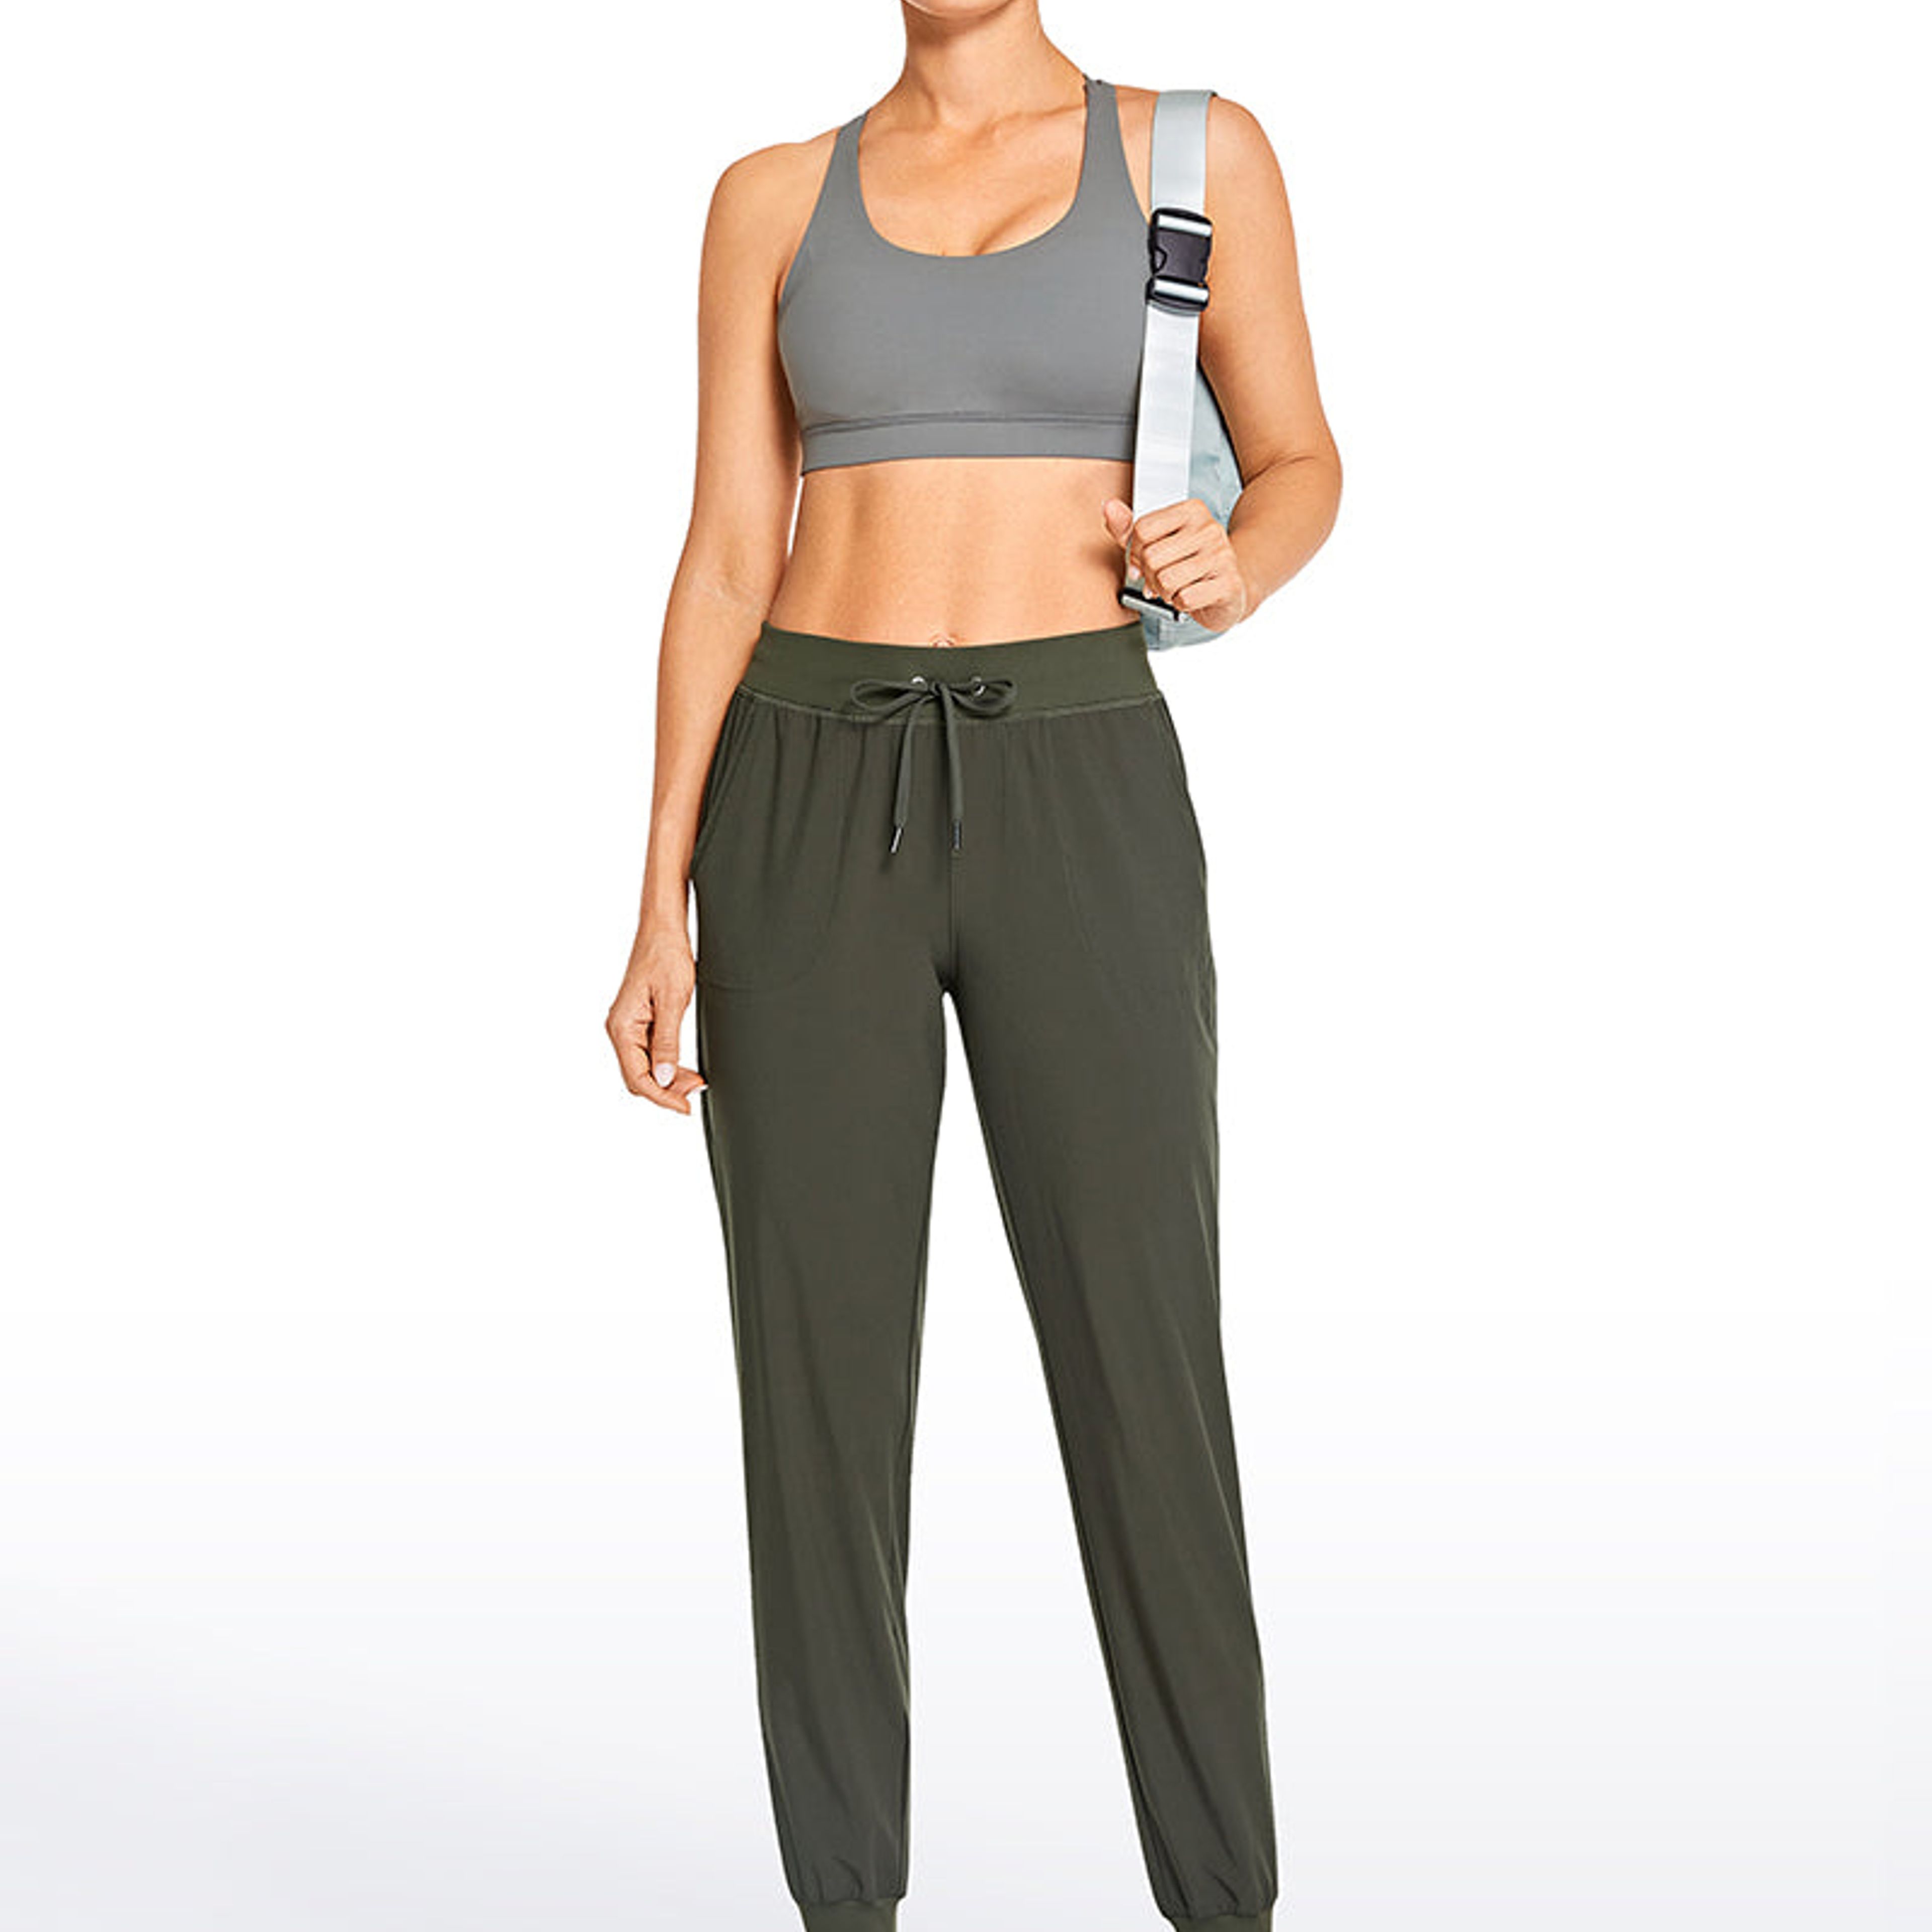 Crz Yoga Feathery-Fit Drawstring Jogger with Pockets 28'' - Flat